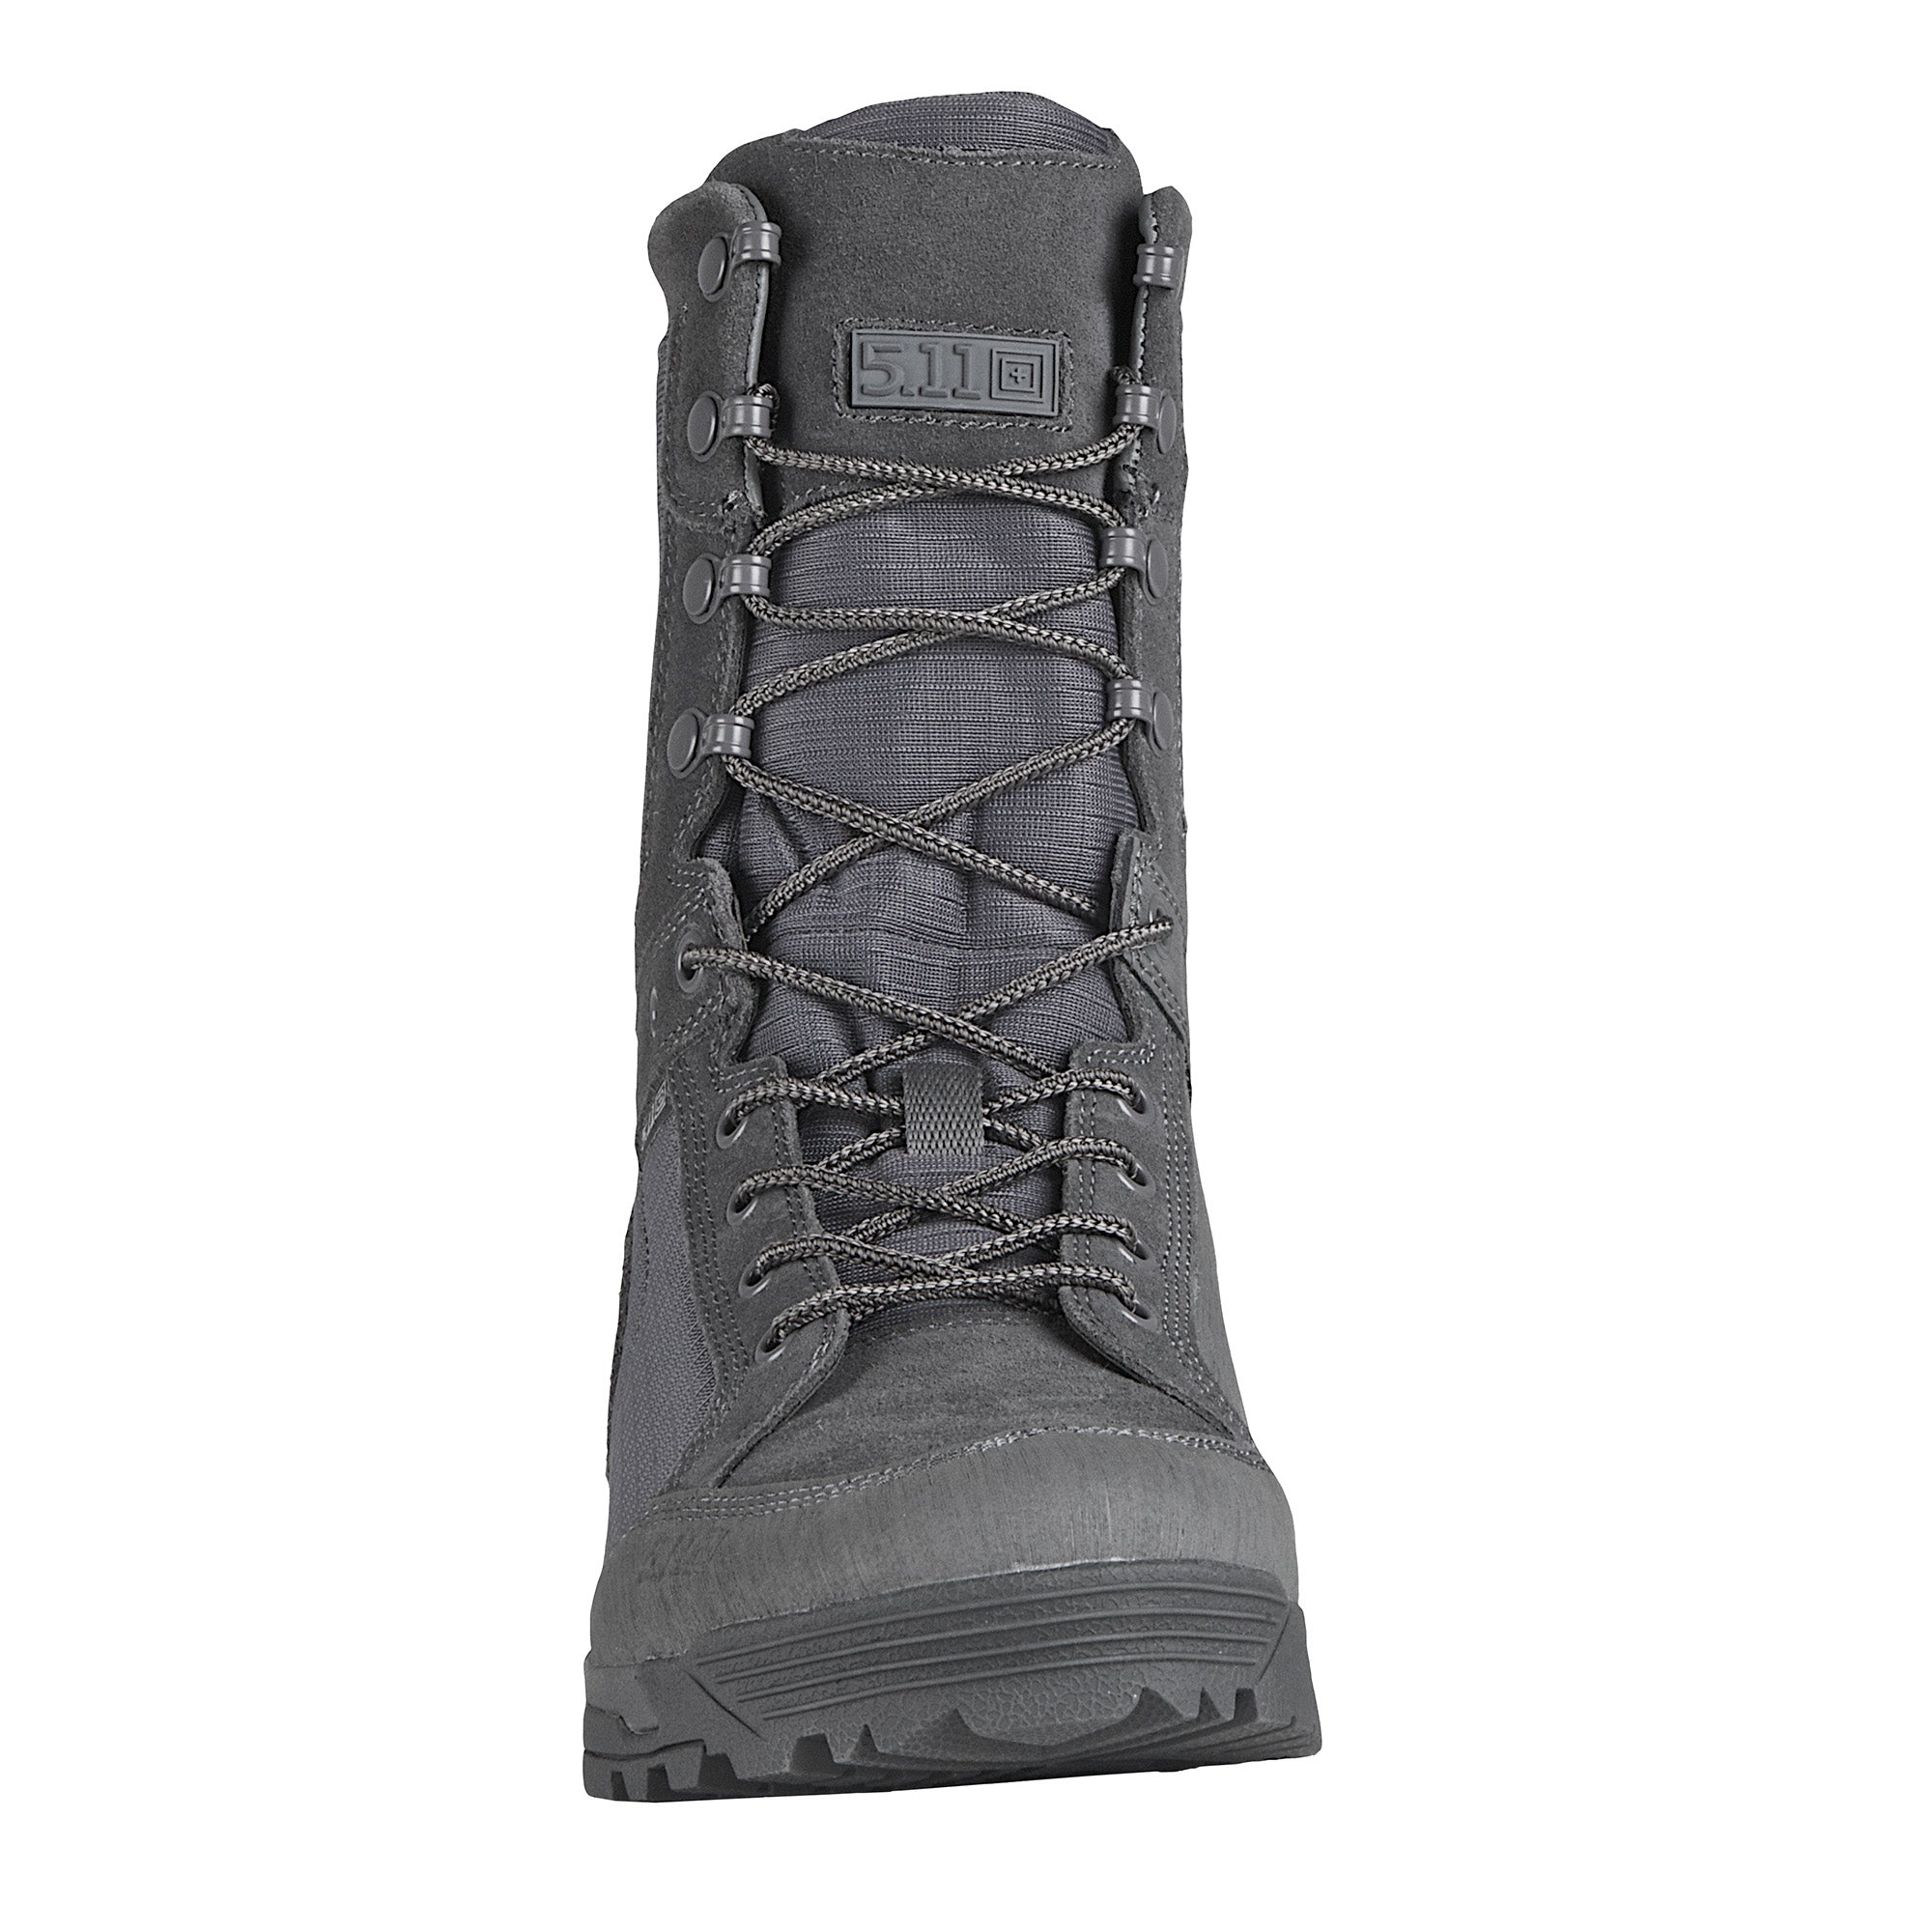 5.11 RECON® Boot – 5.11 Tactical Japan